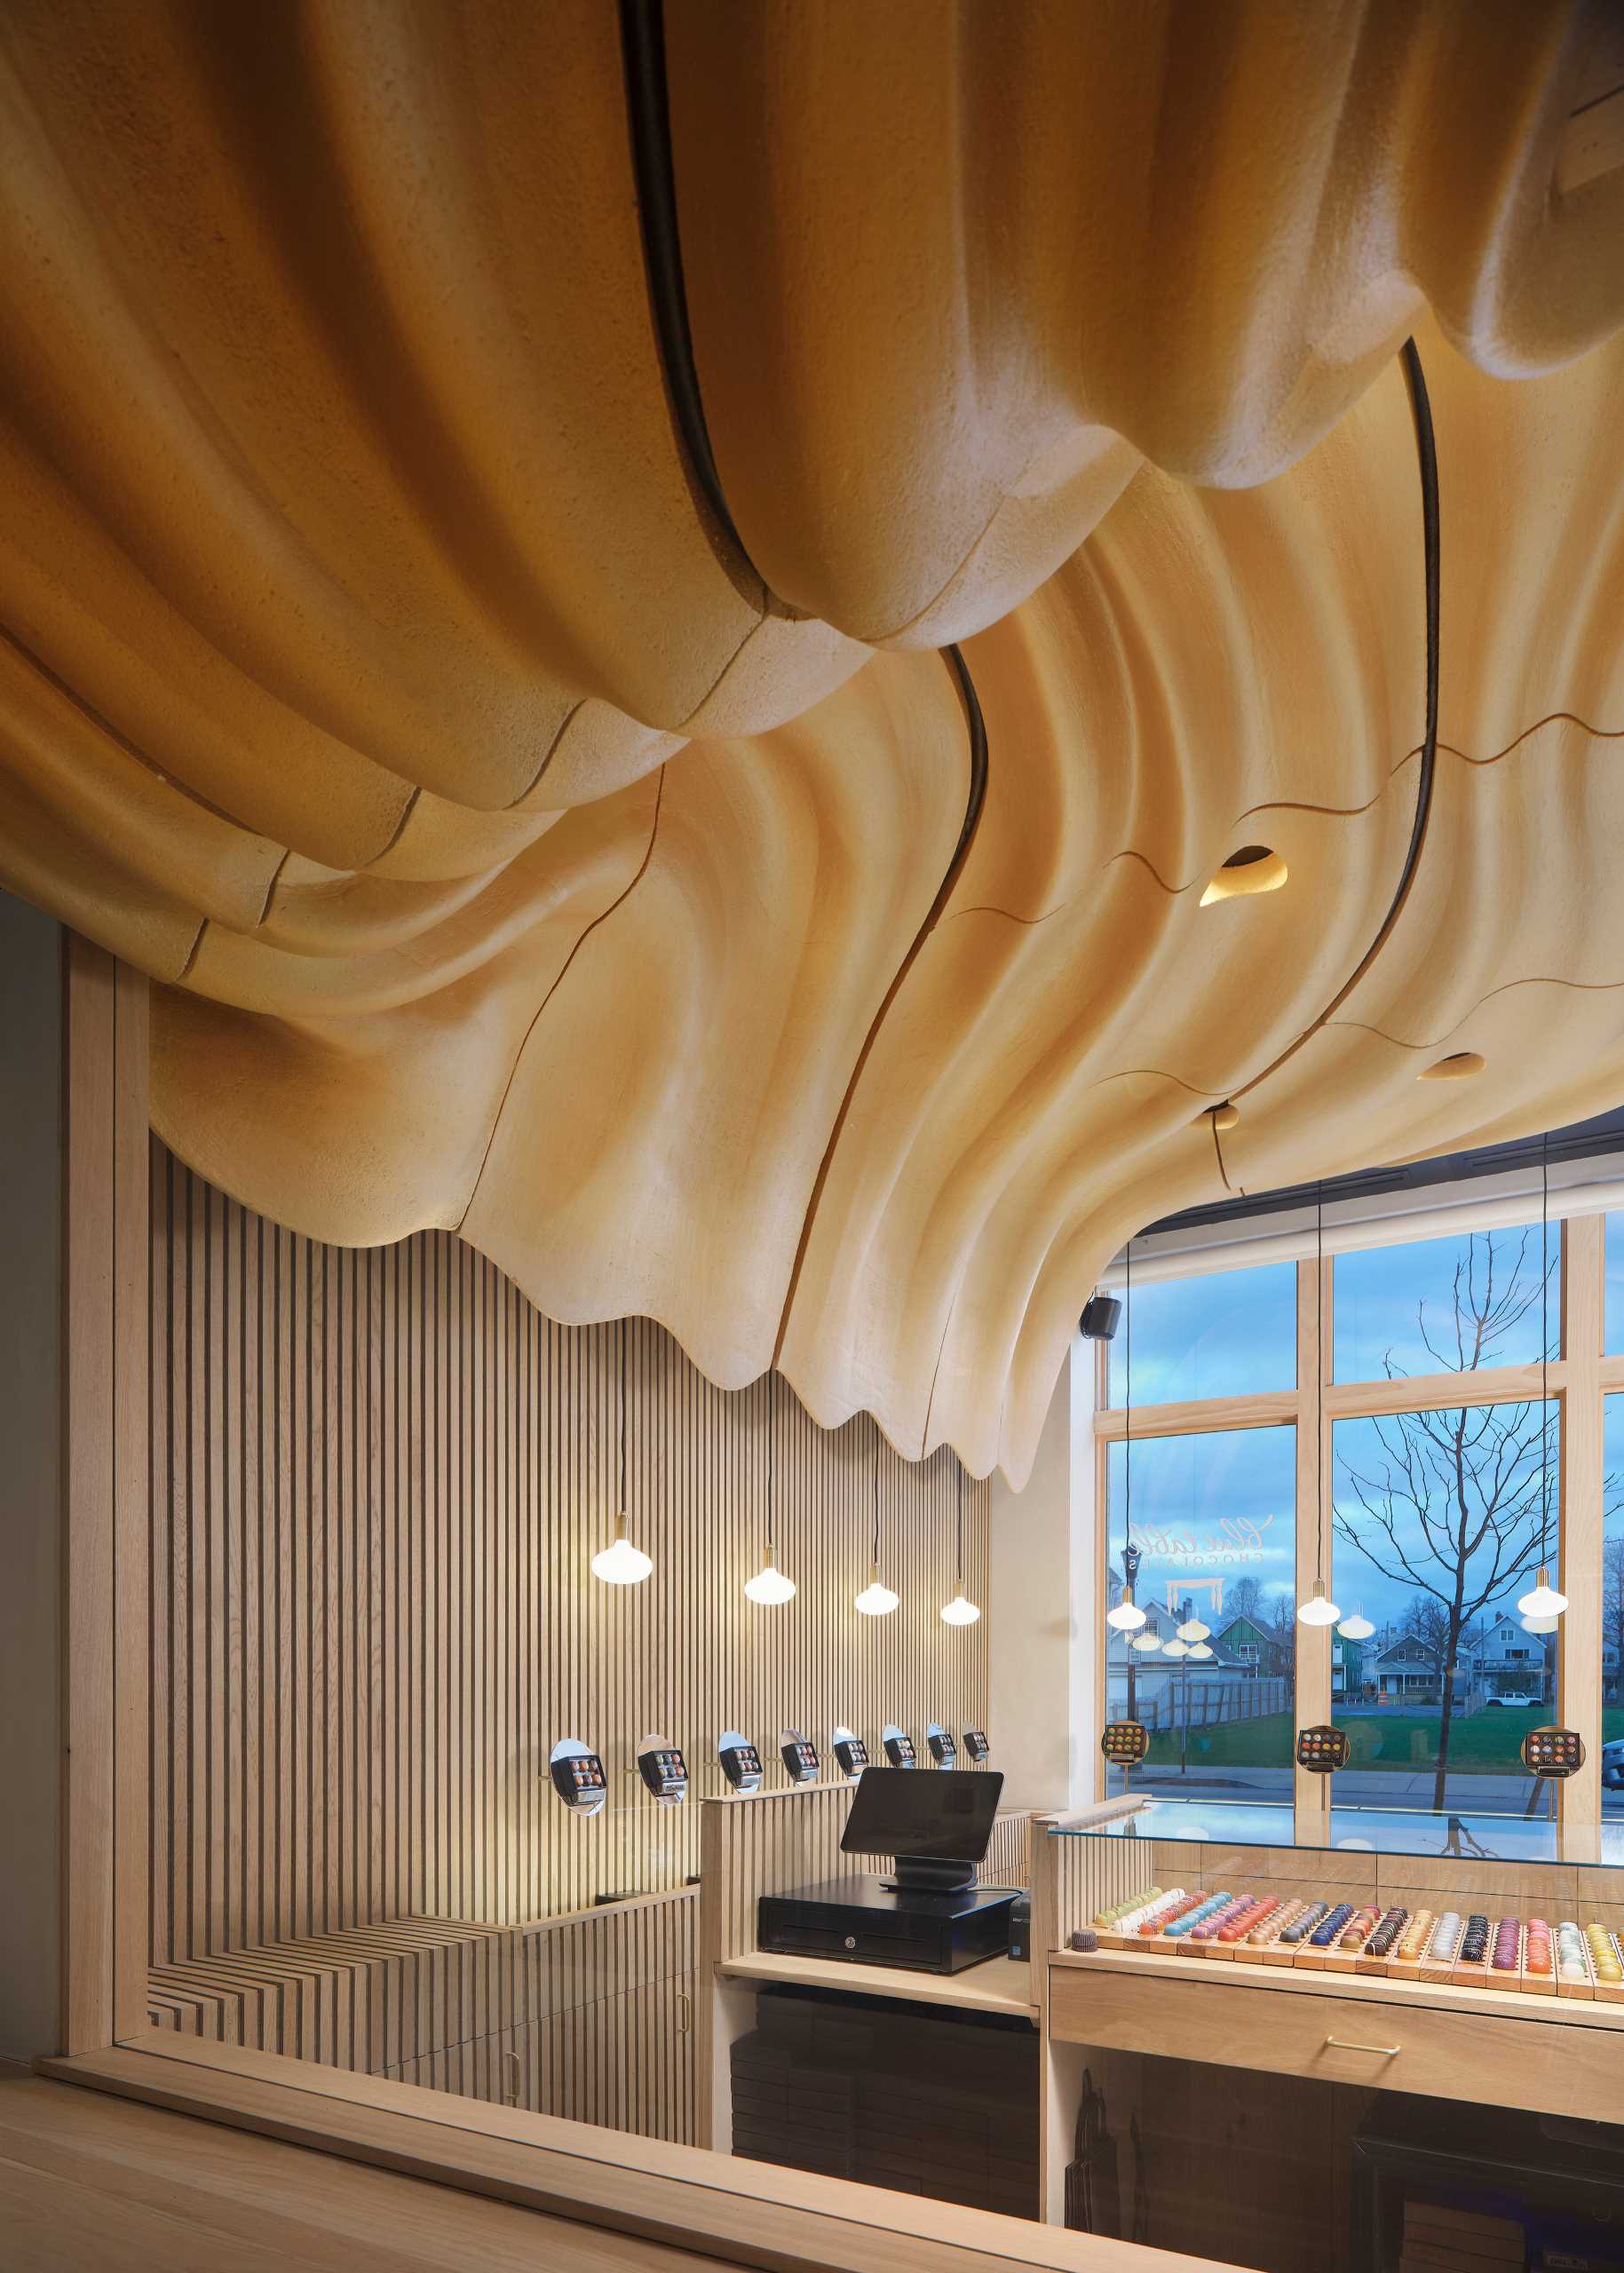 A modern retail chocolate store with a sculptural ceiling that was inspired by flowing untempered chocolate.